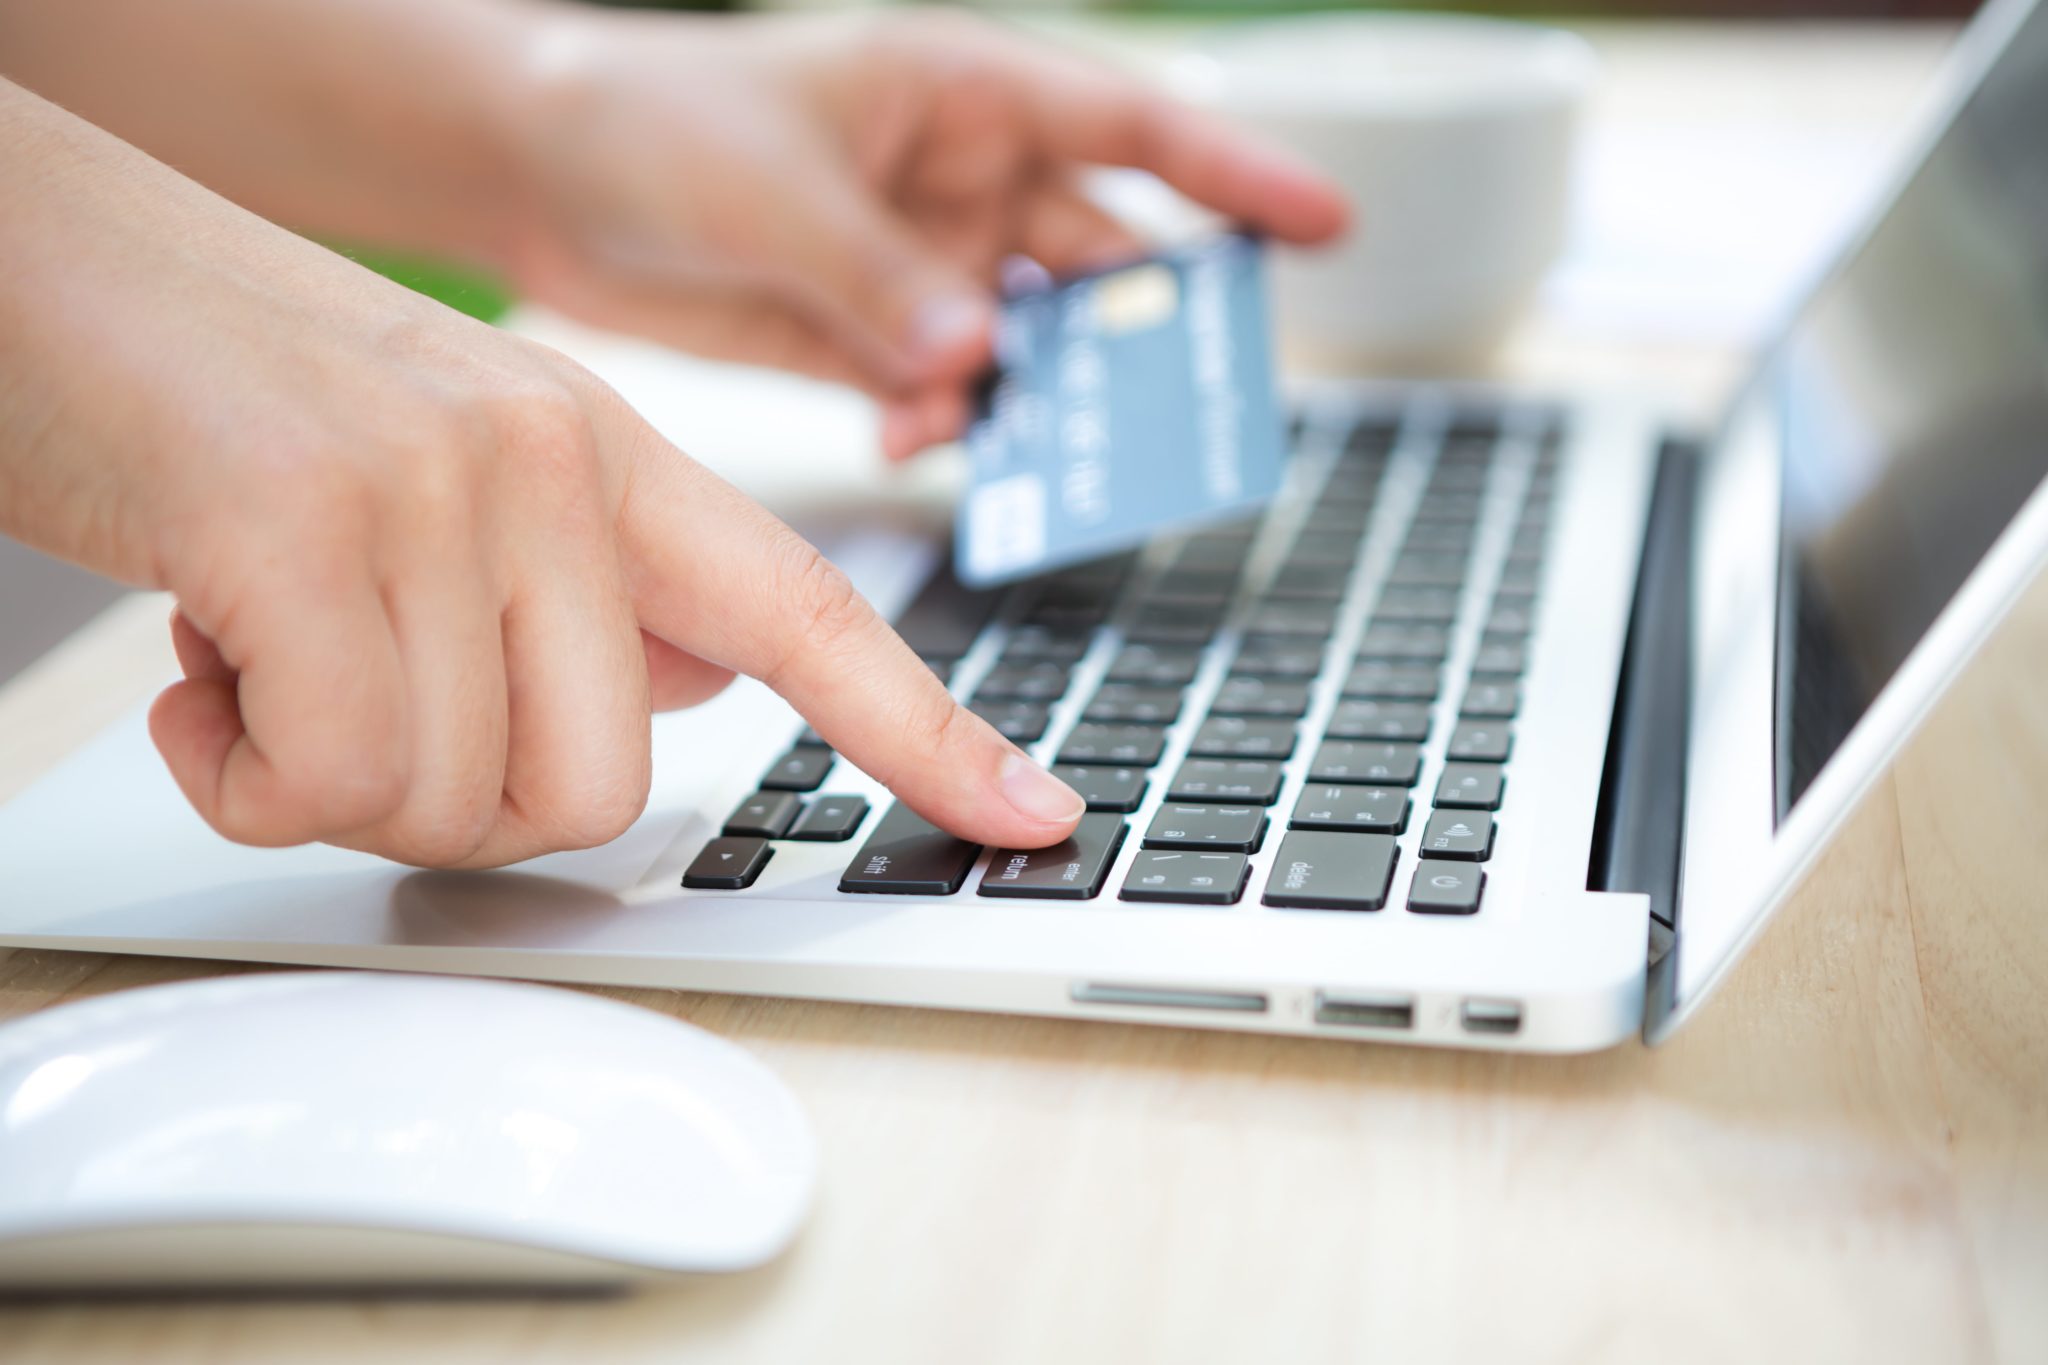 7 Tips for Online Shops to Reduce Return Costs